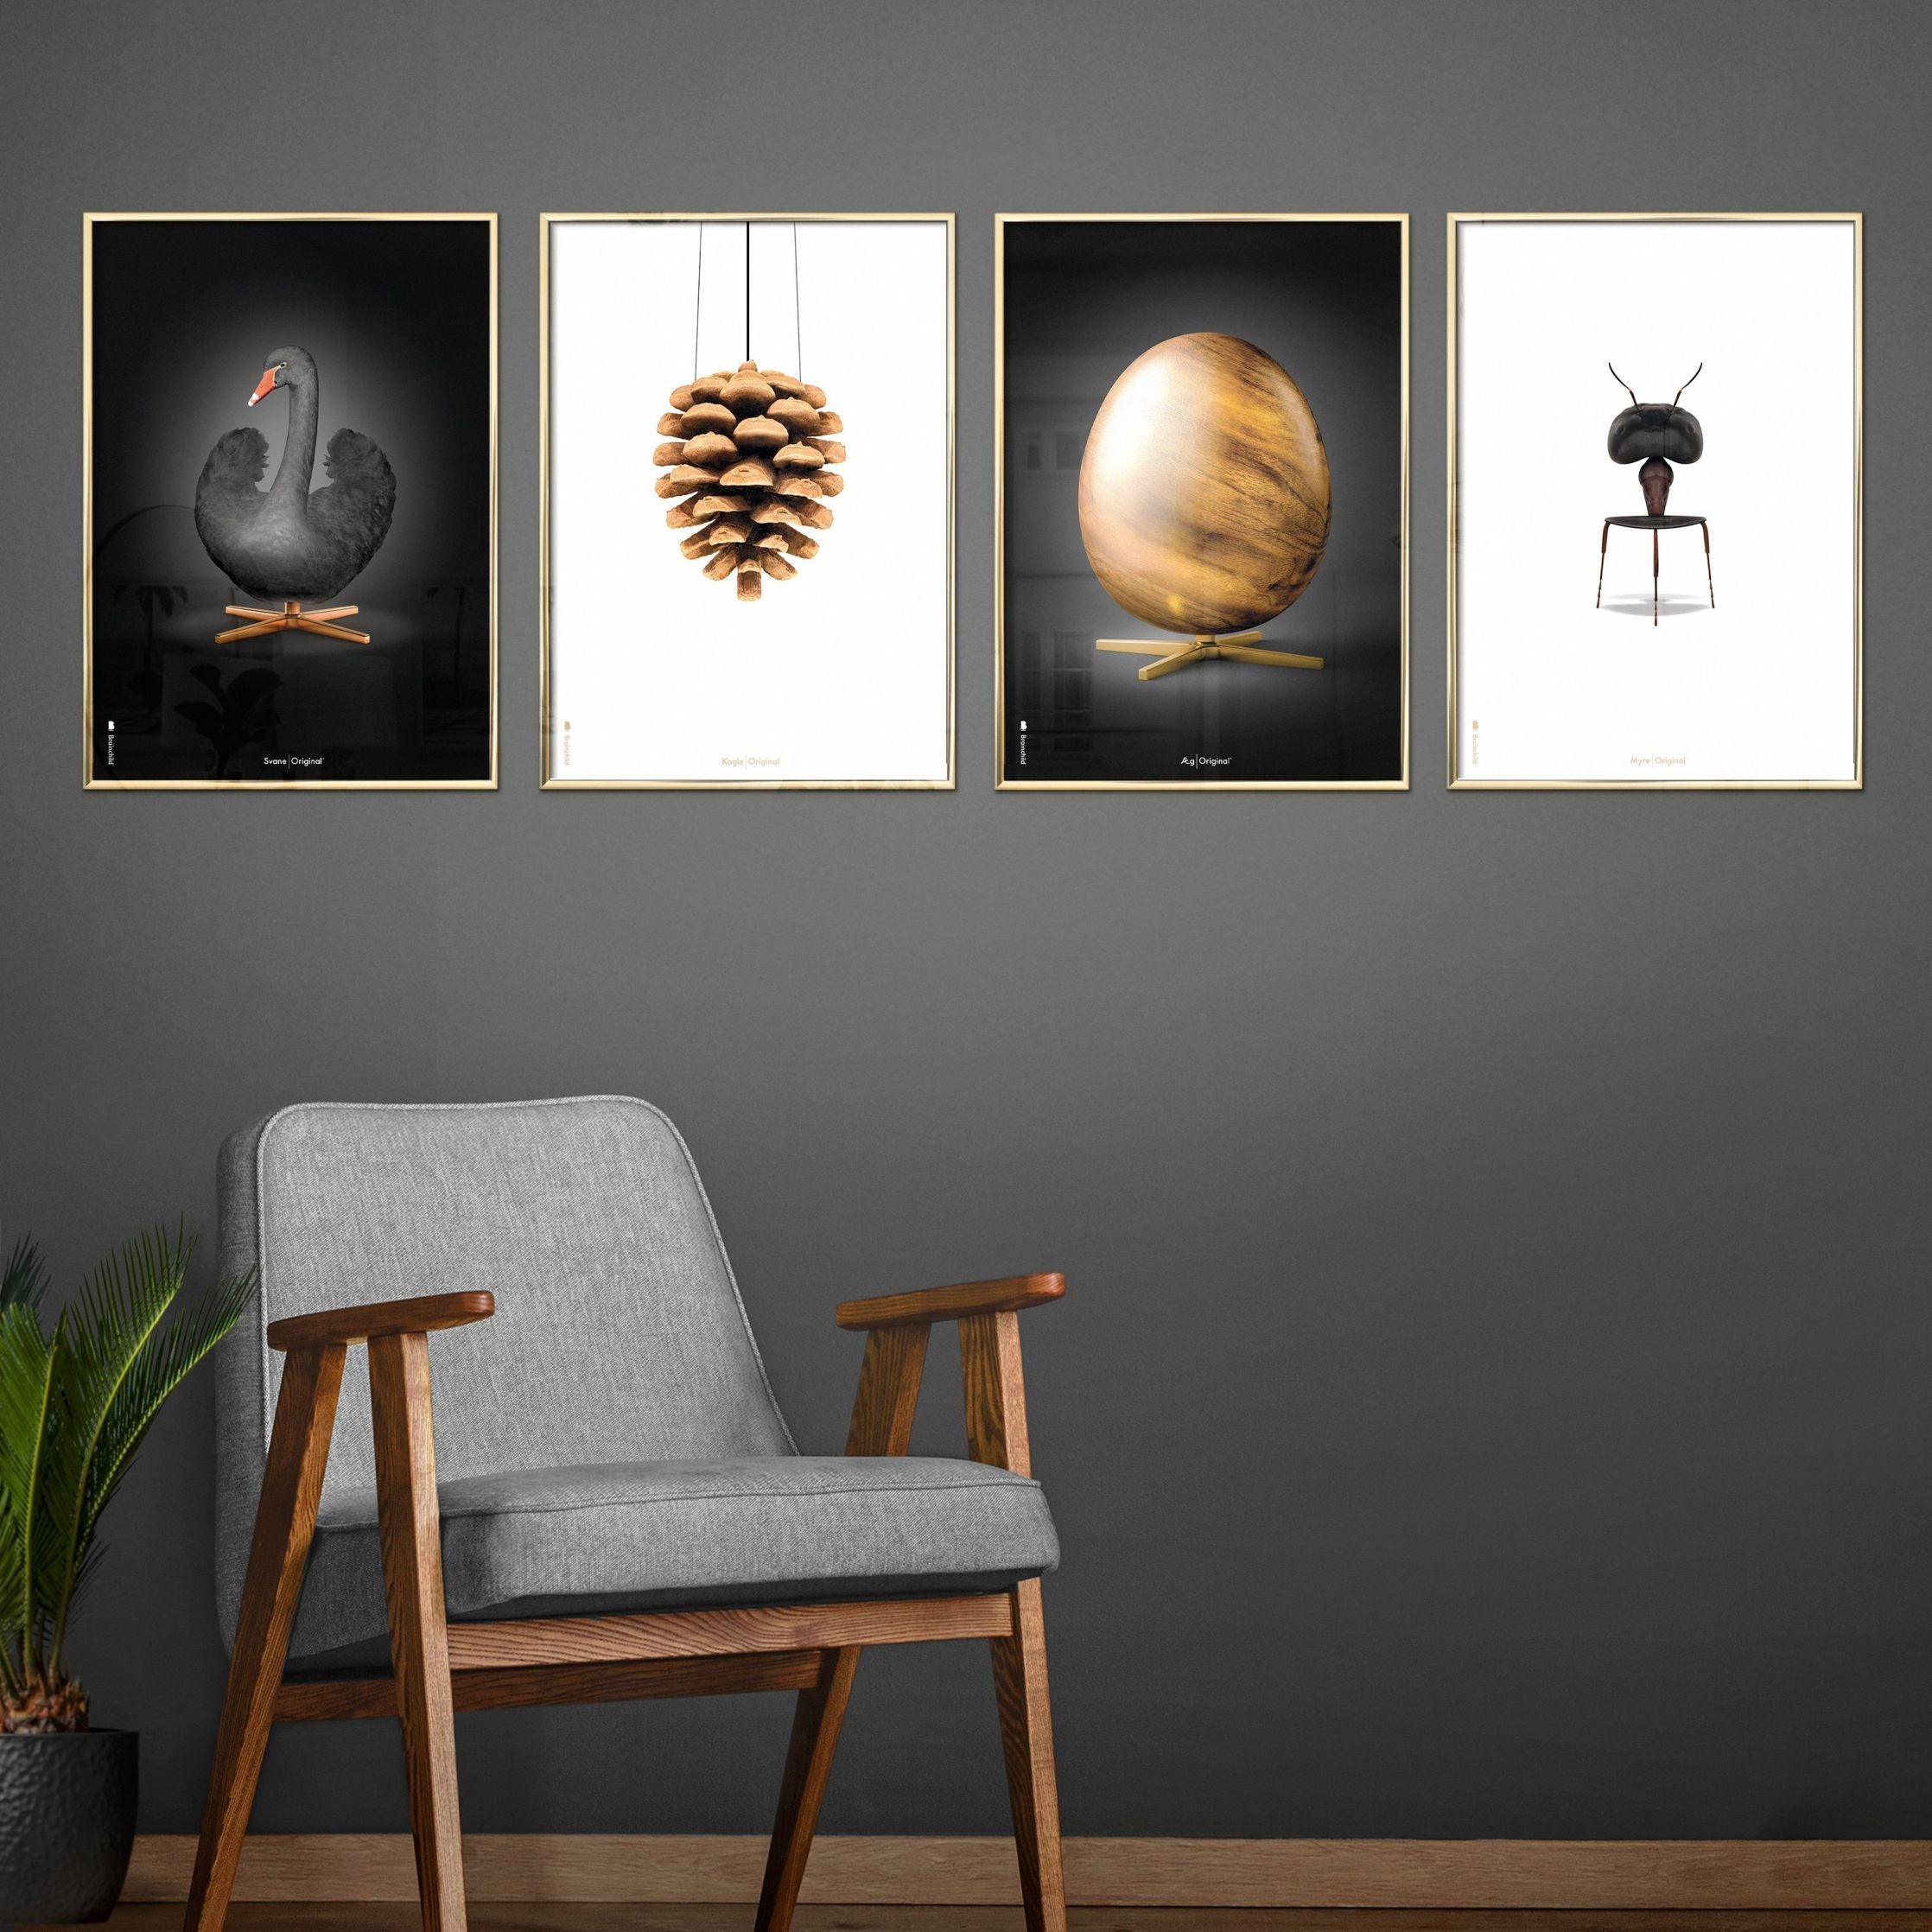 Brainchild Ant Classic Poster, Frame In Black Lacquered Wood 30x40 Cm, White Background